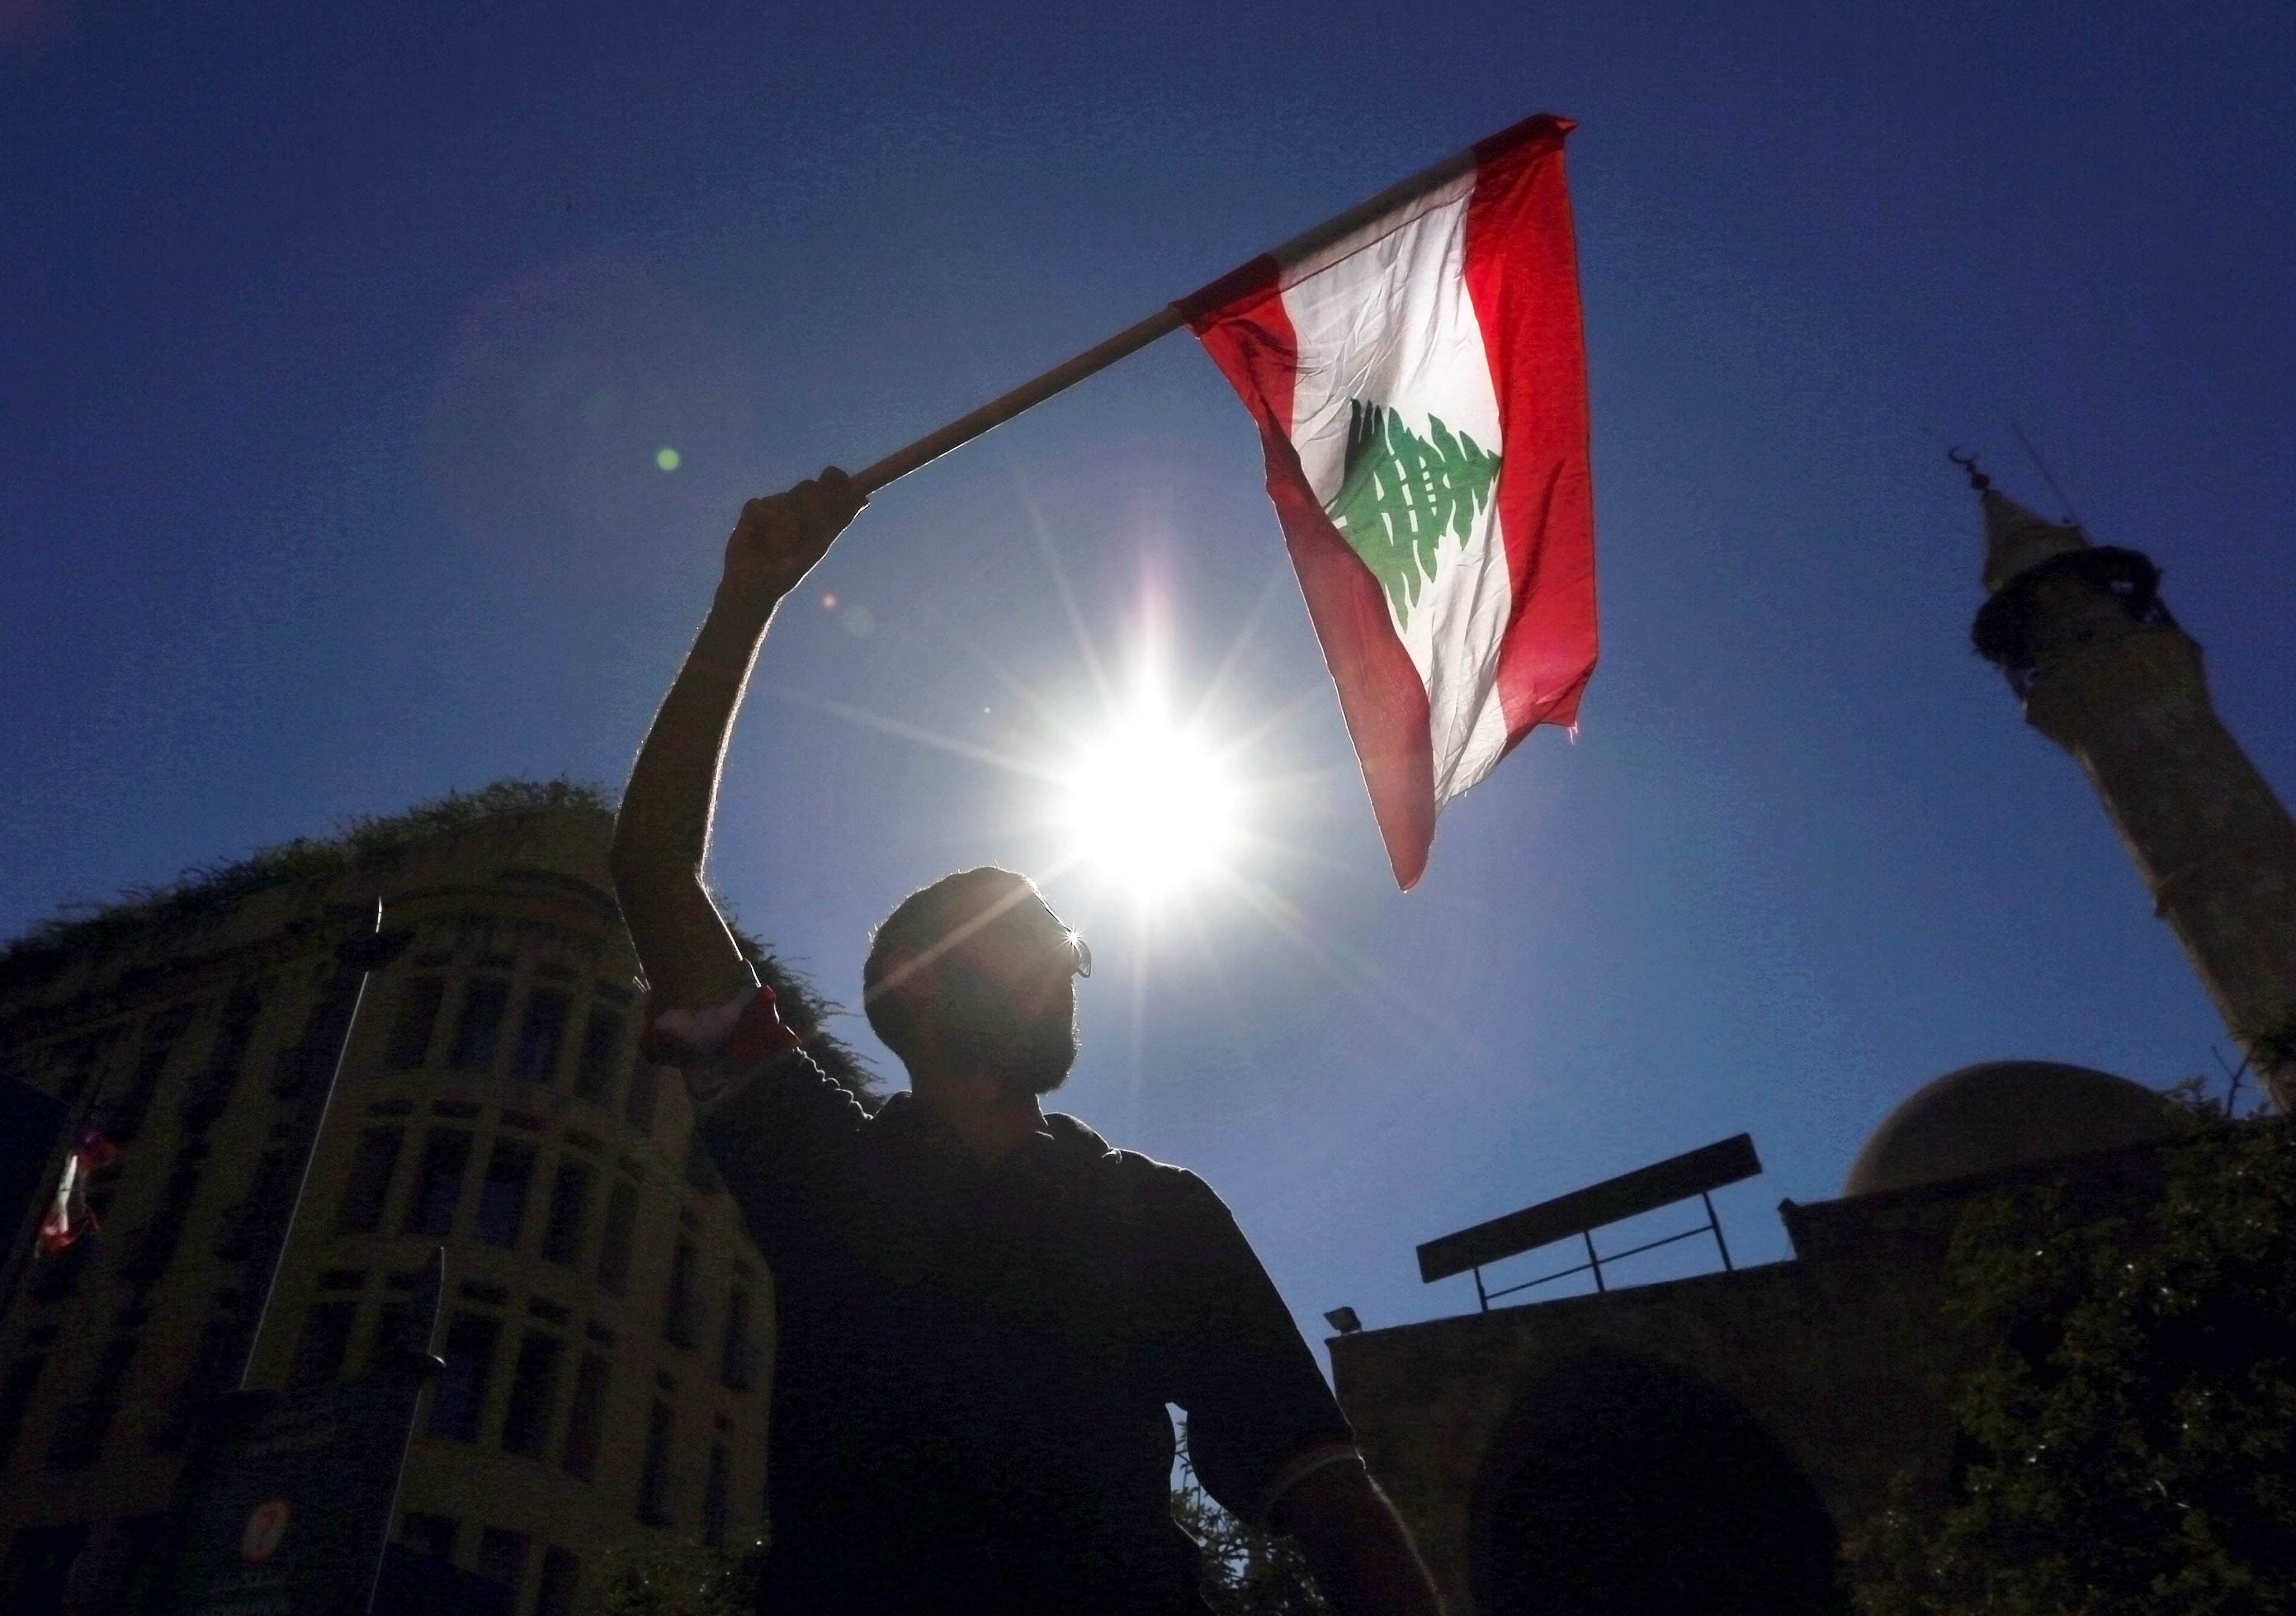 A man waves a Lebanese flag during a protest near the parliament building in downtown Beirut, Lebanon, AP Photo/Bilal Hussein